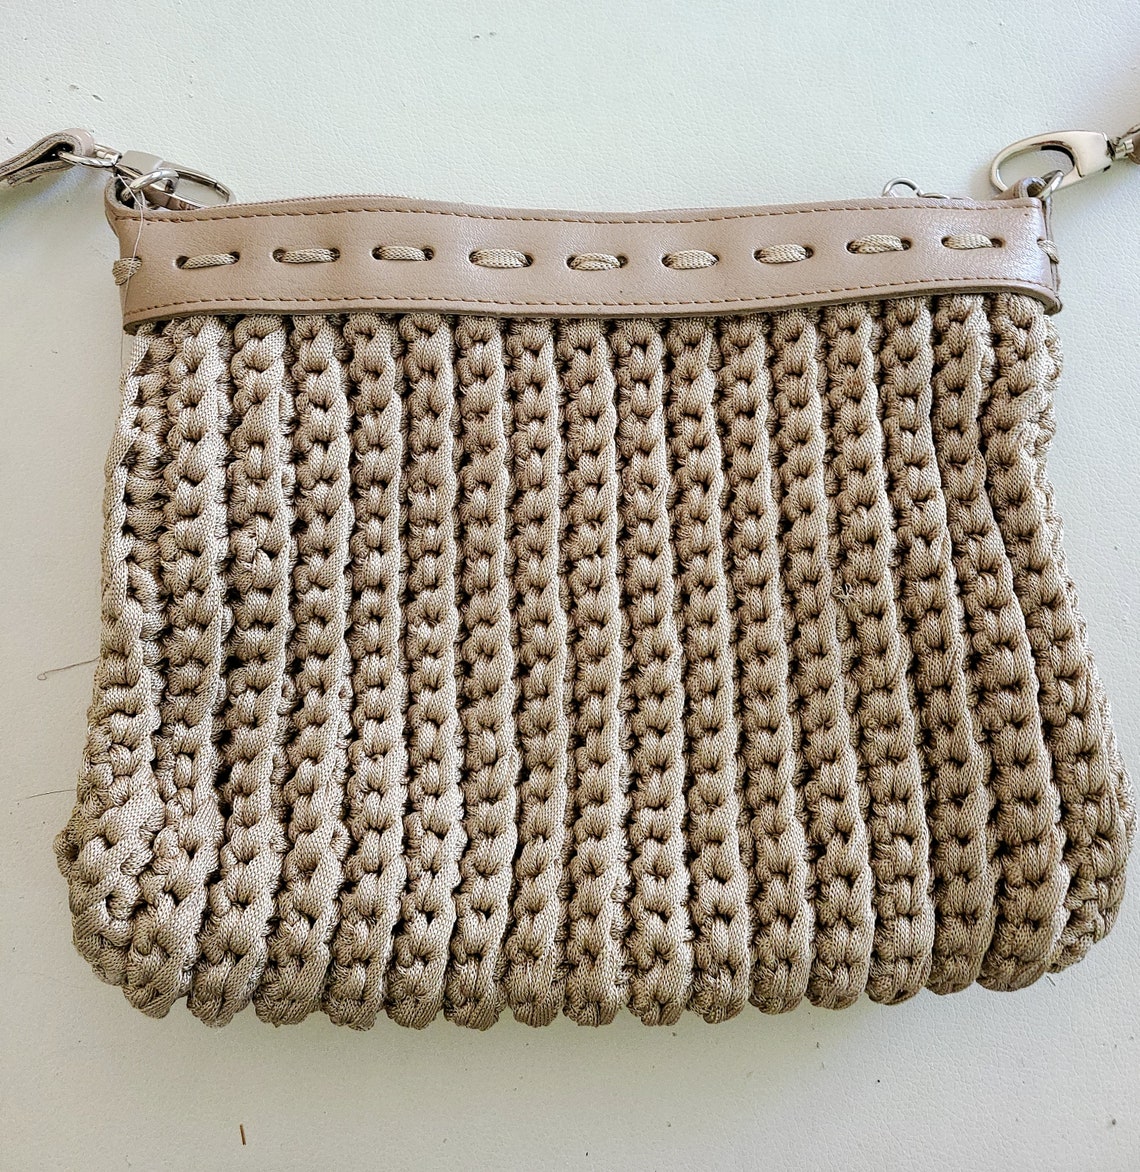 Crochet or Knit Purse Hand Bag Made of All Yarn Except the - Etsy UK